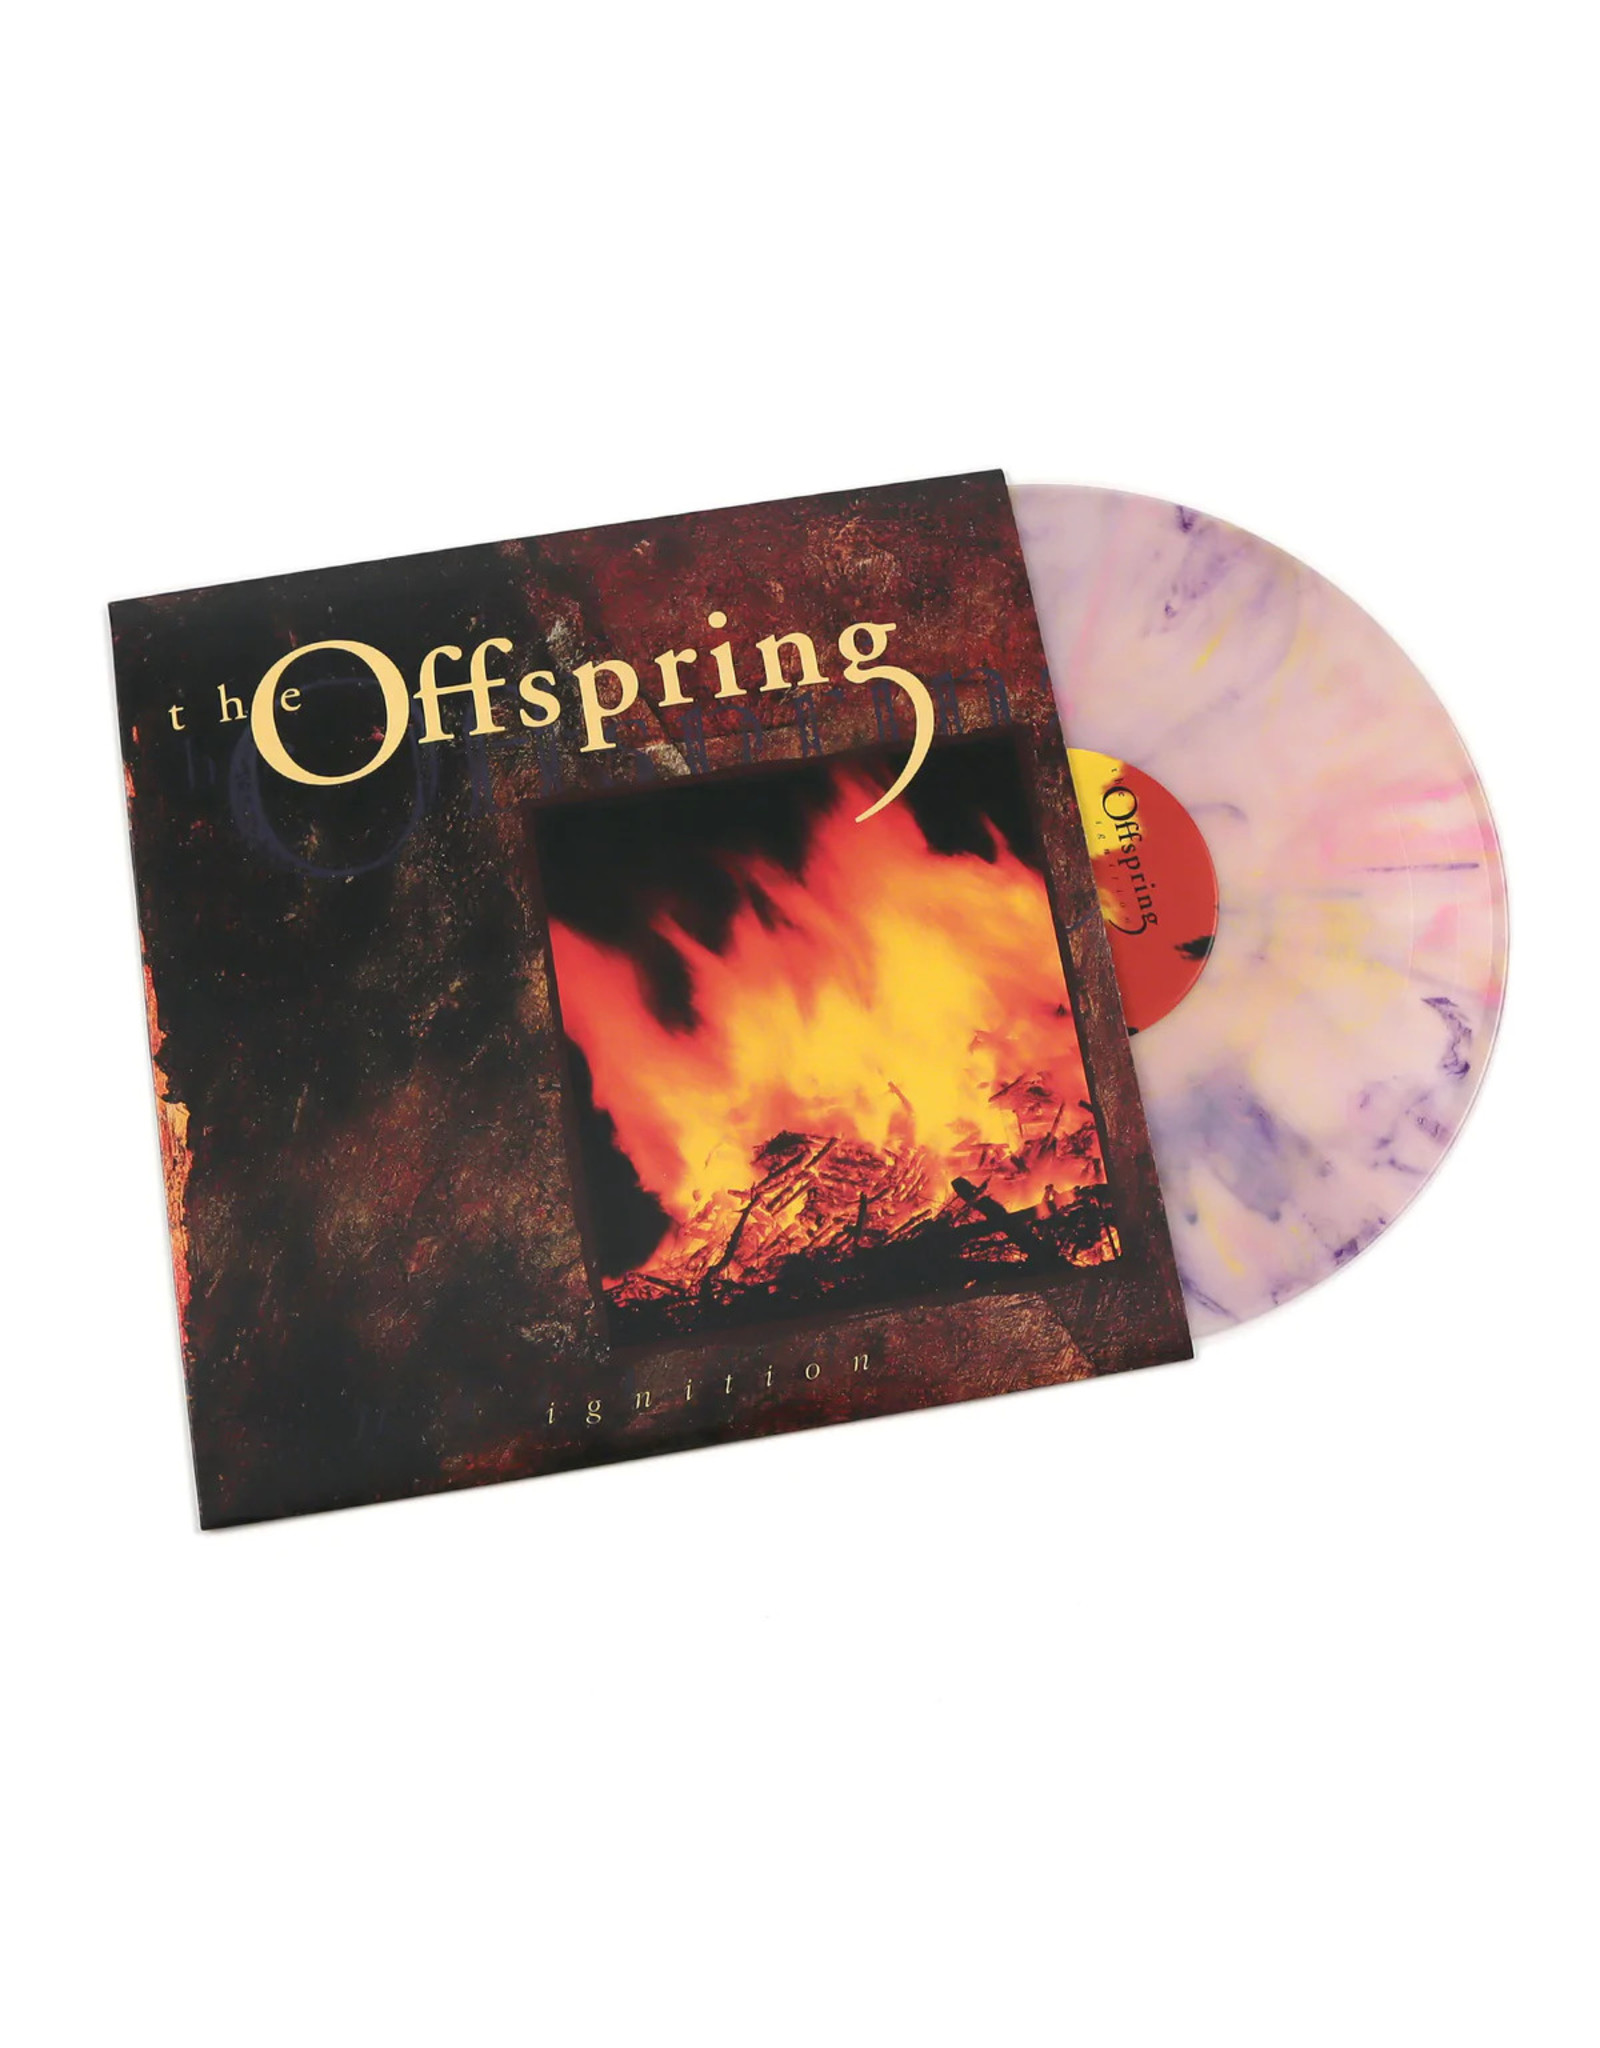 Offspring - Ignition (30th Anniversary) [Pink Marble Vinyl]